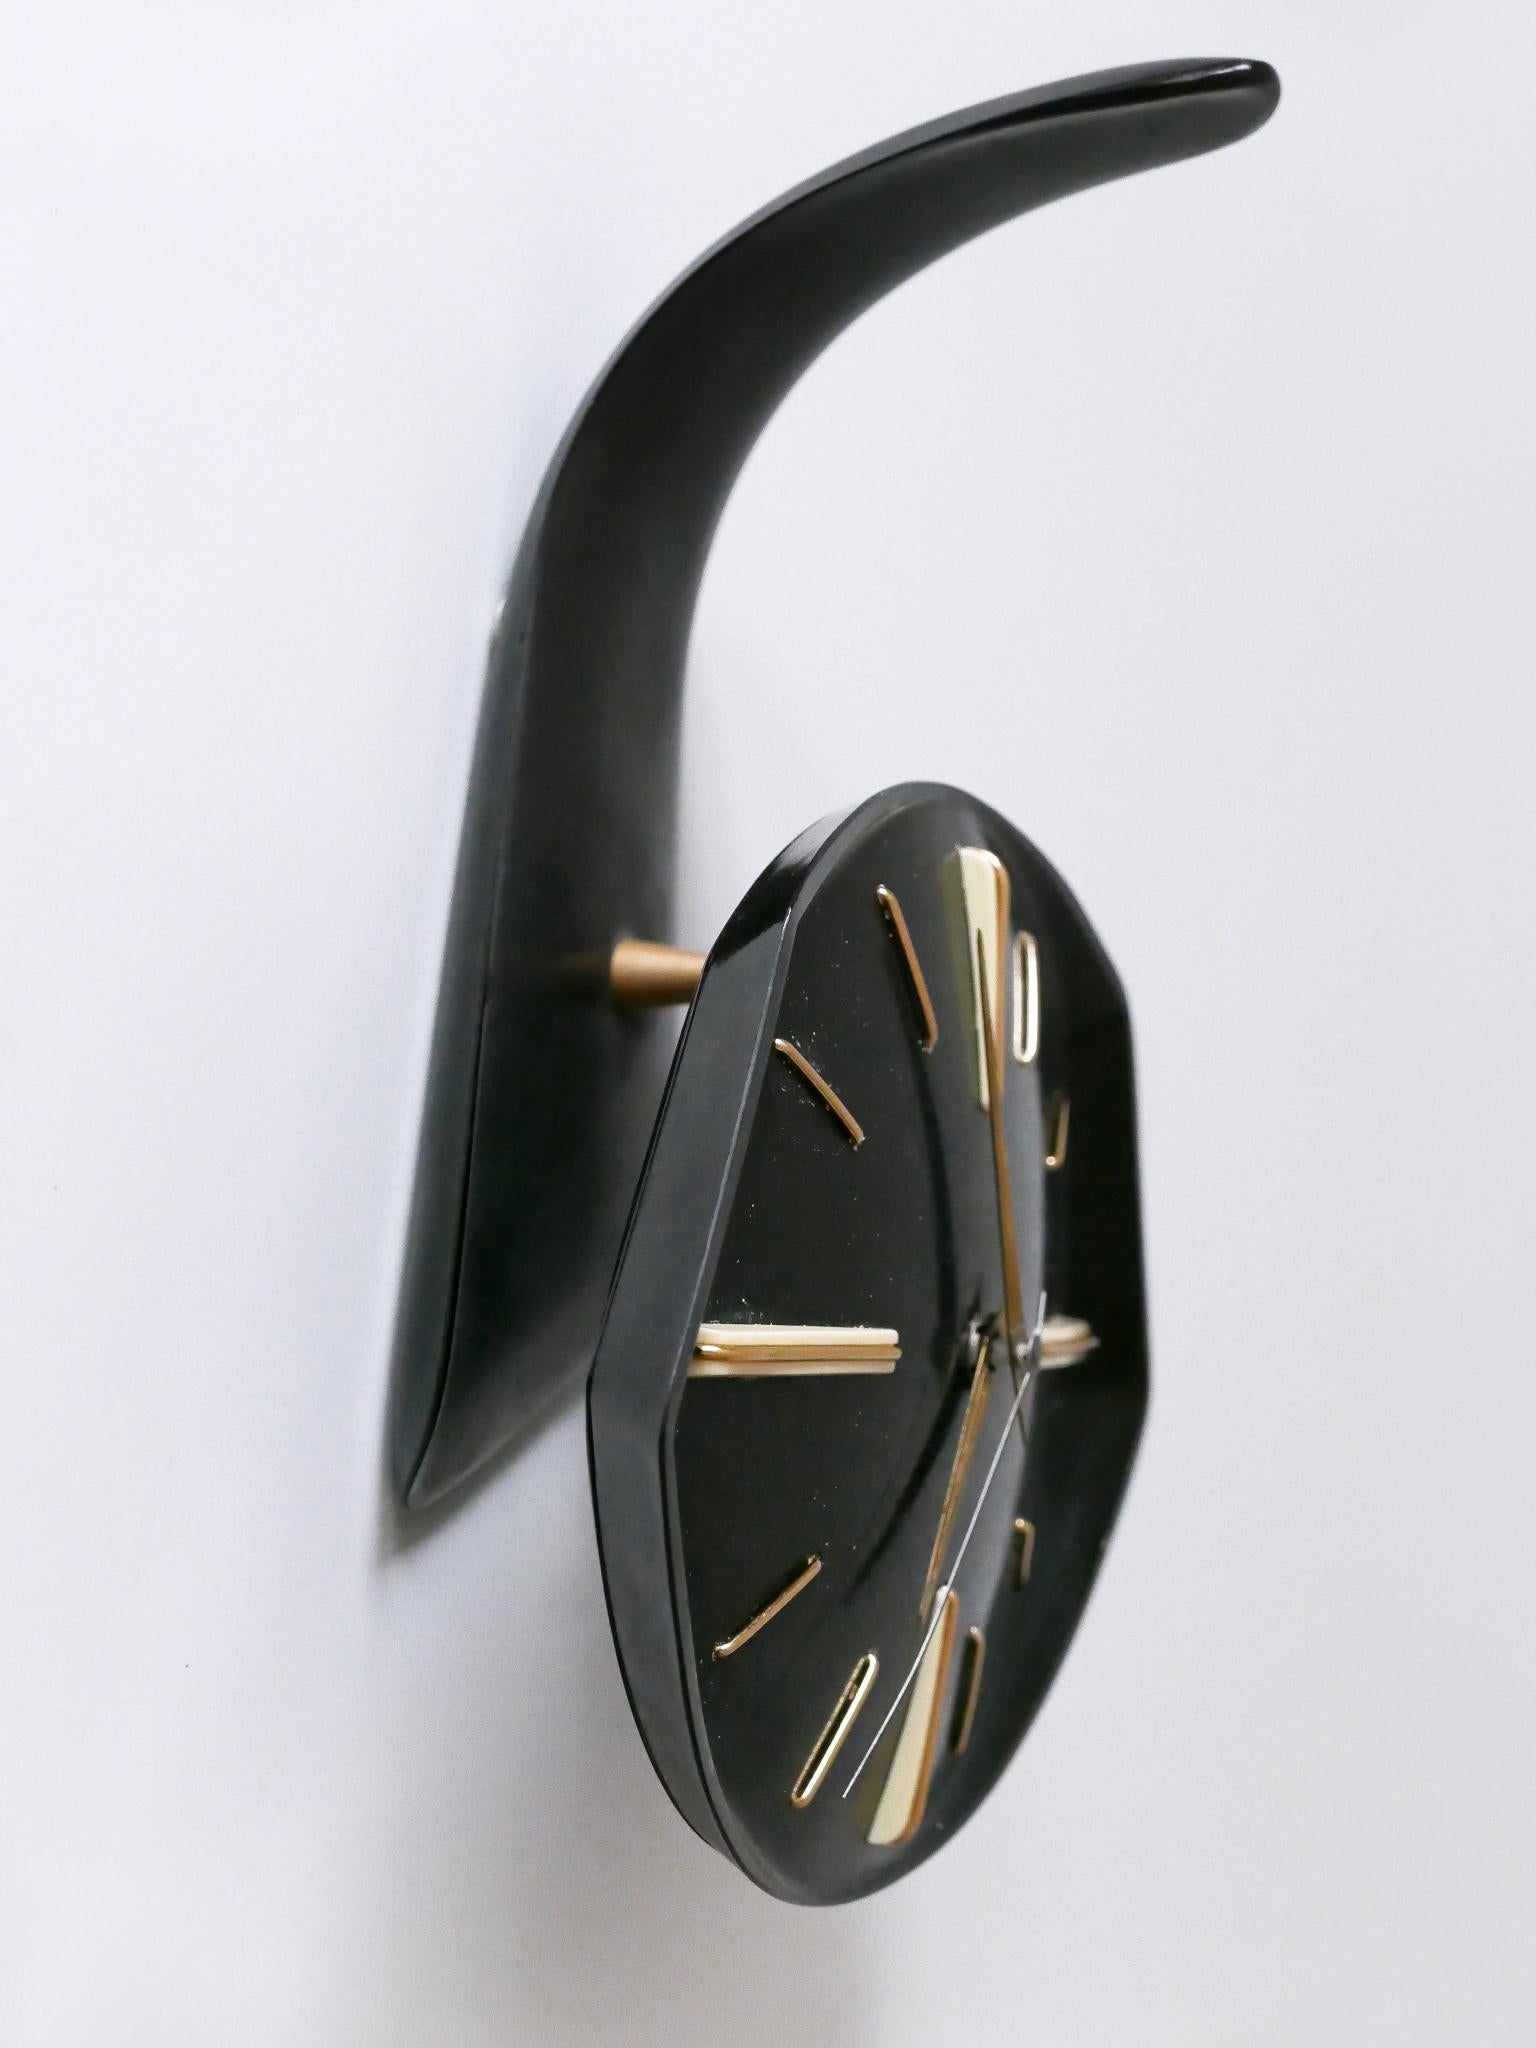 Rare and Lovely Mid-Century Modern Bakelite Table or Wall Clock by PRIM 1950s For Sale 5